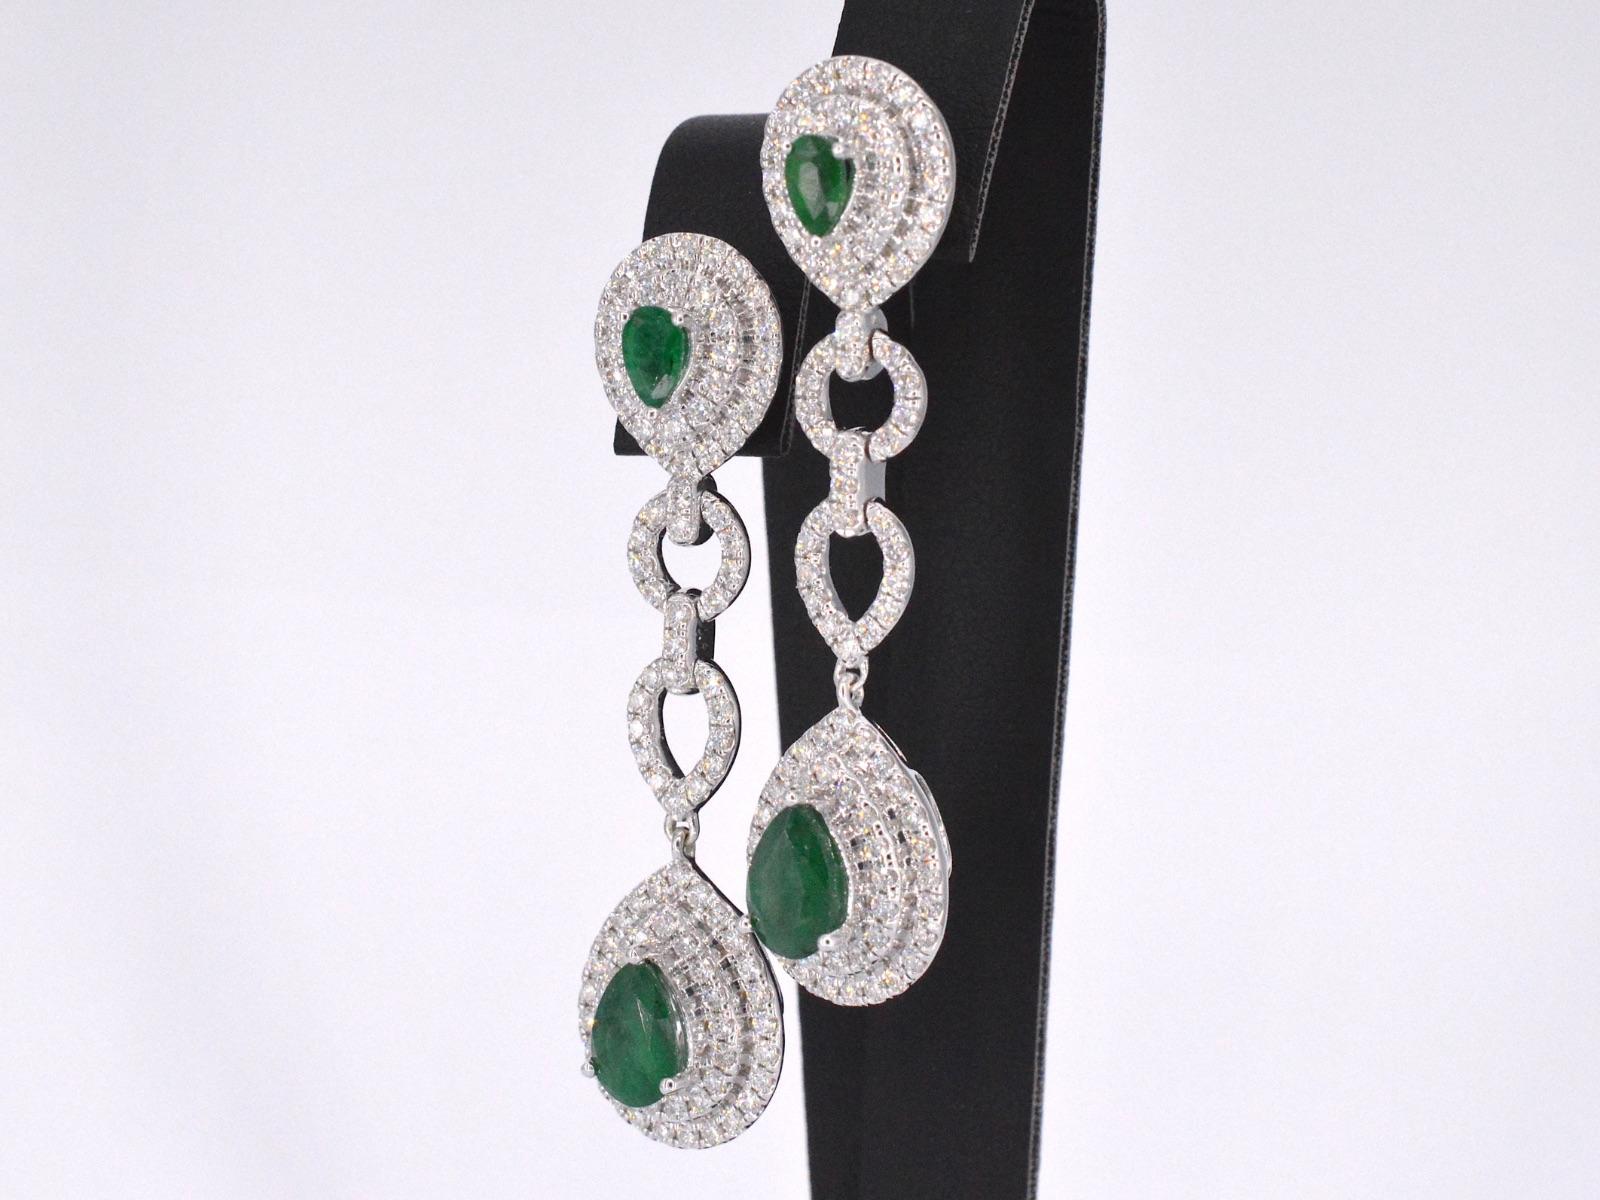 Contemporary White gold earrings with diamonds and emeralds